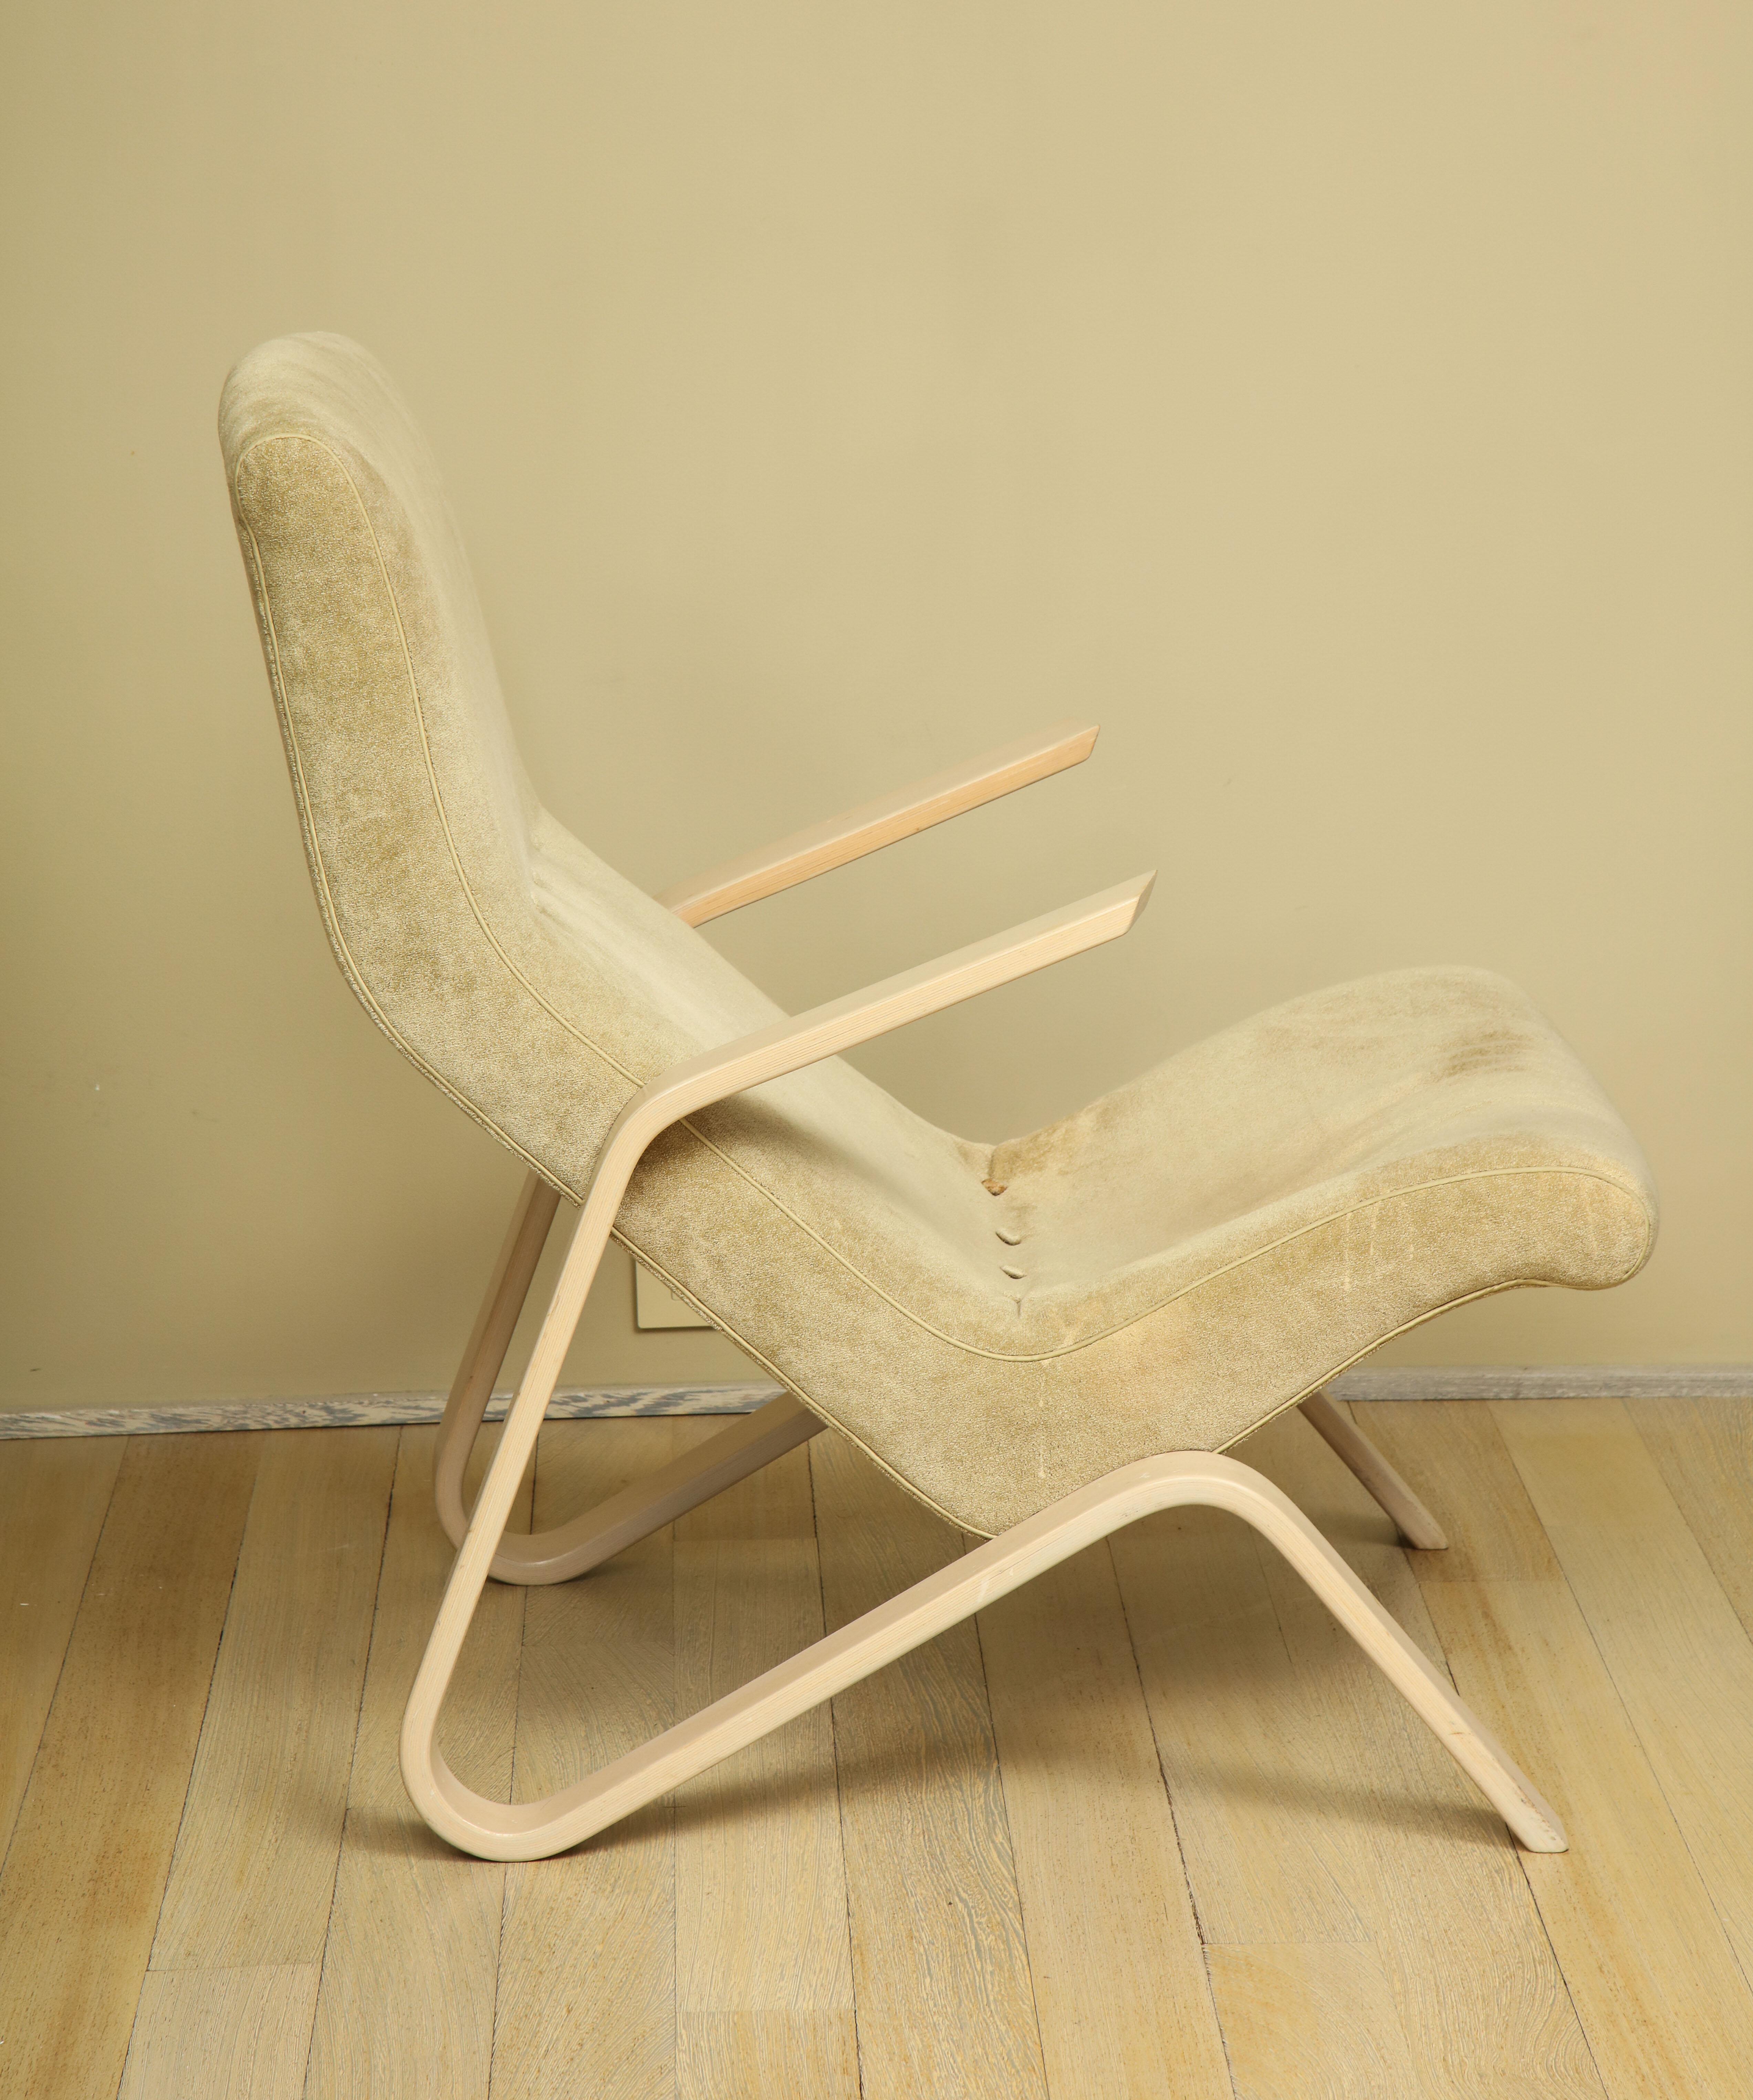 An early grasshopper chair by Eero Saarinen for Knoll. USA, circa 1970. Made of a signature bentwood frame and recovered in off-white fabric as shown.

Provenance: The New York City residence of Kevin Sharkey; published in Martha Strewat Living